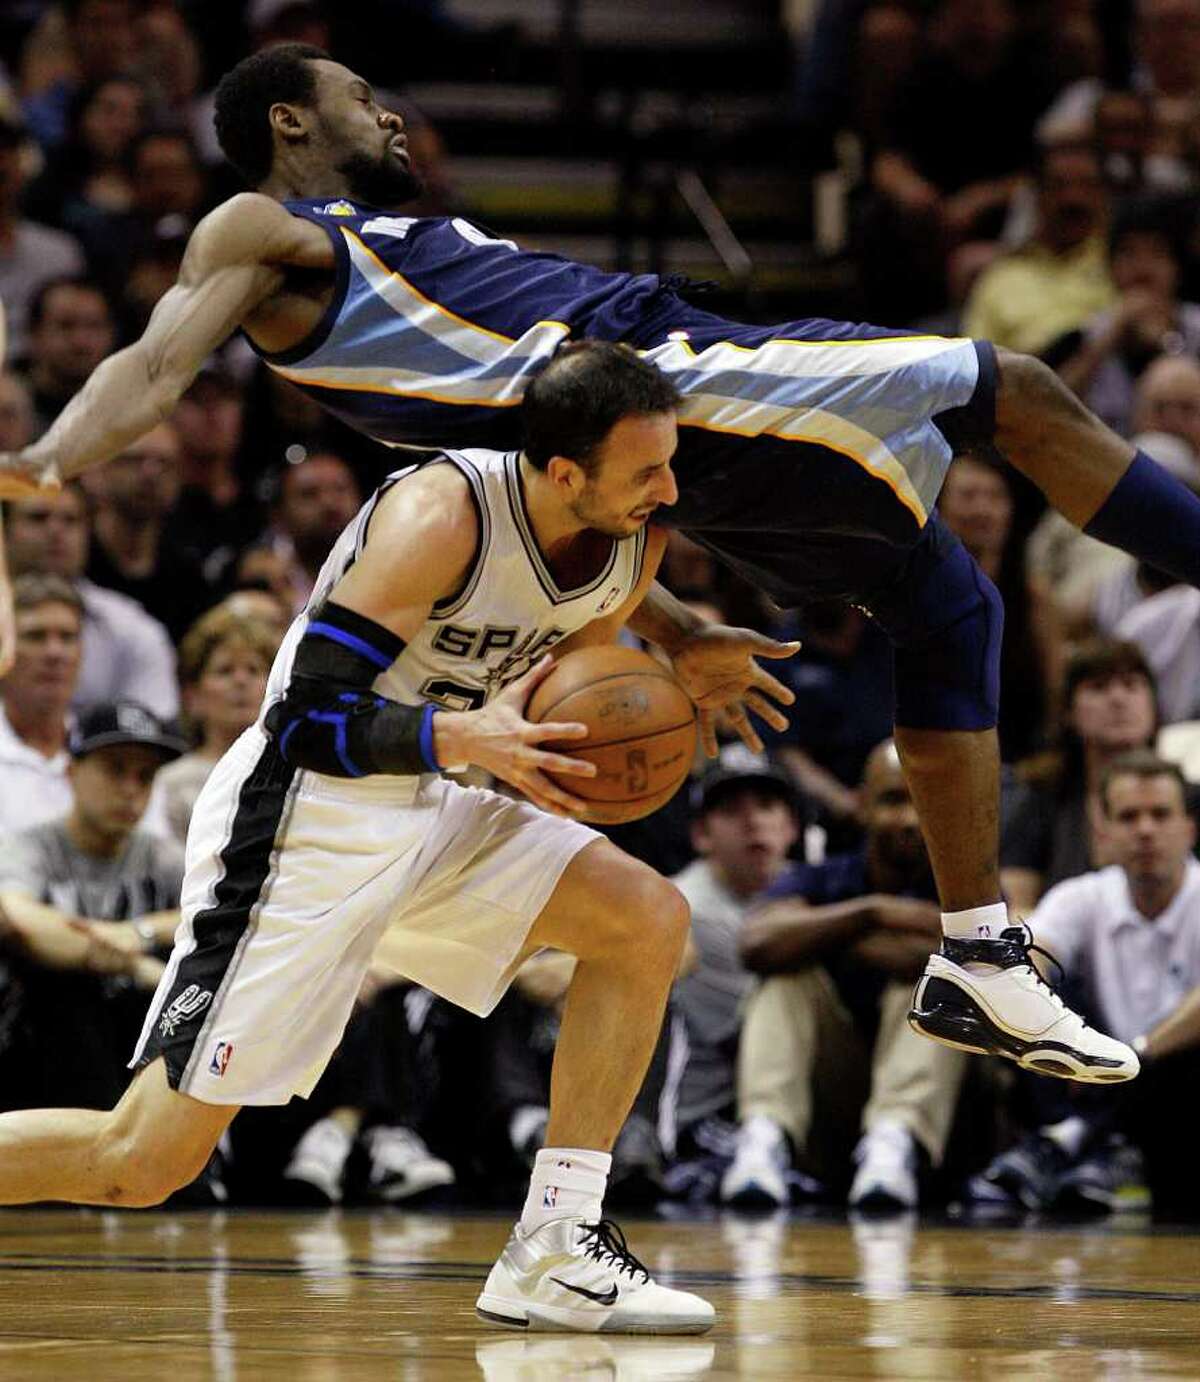 SPURS -- Memphis Grizzlies Tony Allen falls on San Antonio Spurs Manu Ginobili during the first half in the second game of the Western Conference Quarter Finals at the AT&T Center, April 20, 2011. JERRY LARA/glara@express-news.net